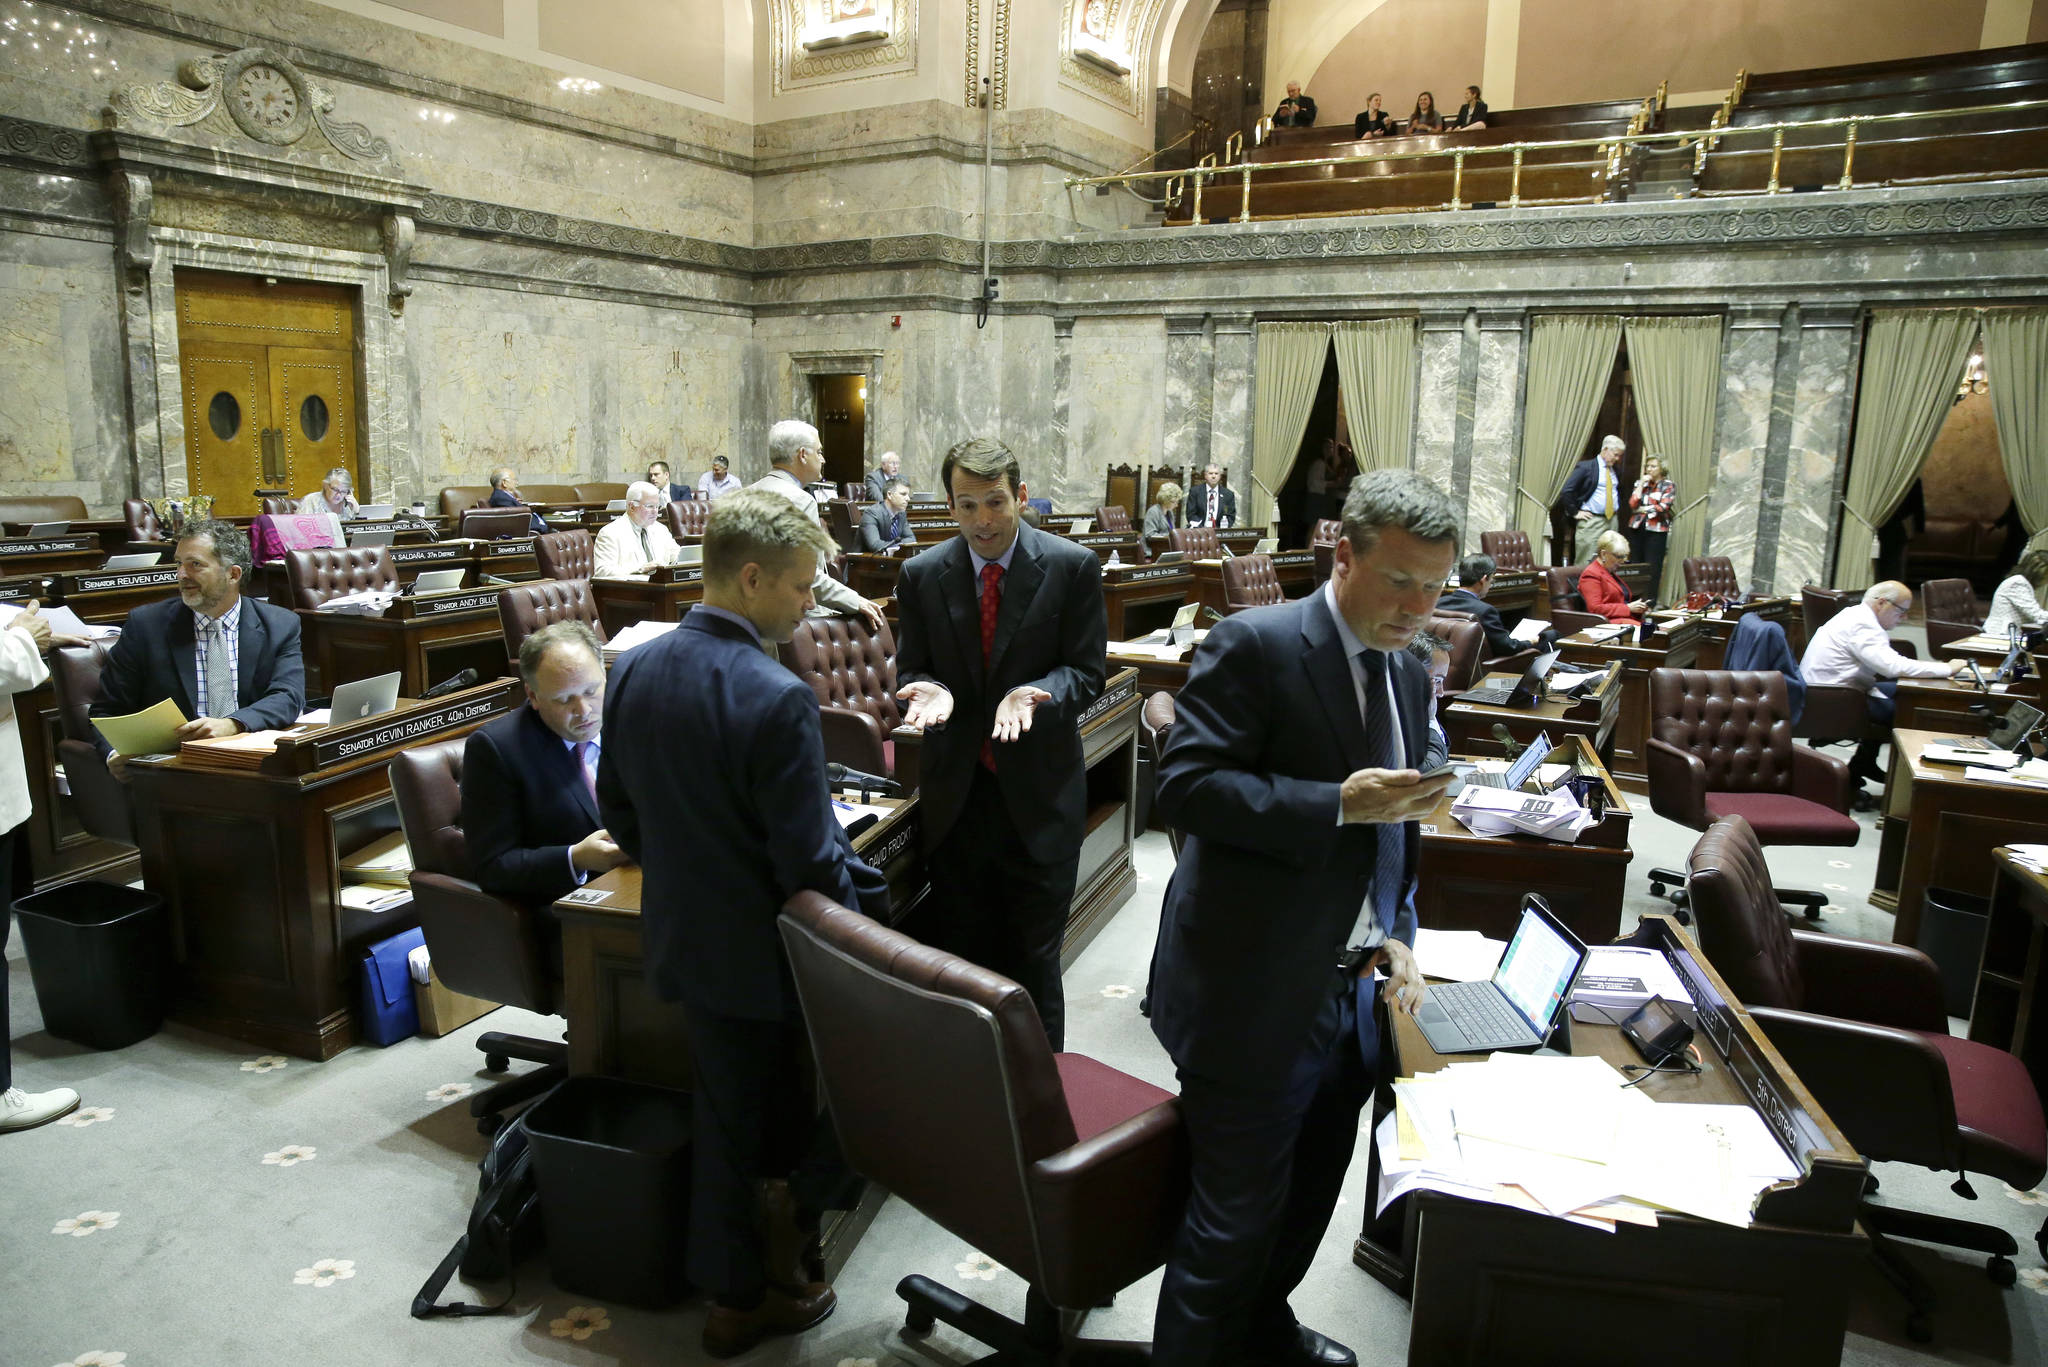 Sen. Mark Mullet, D-Issaquah, takes a phone call at right Friday after talking with Sen. Andy Billig, D-Spokane, center, and Sen. Jamie Pedersen, D-Seattle, center-left, on the floor of the Senate at the Capitol in Olympia. (Ted S. Warren/The Associated Press)